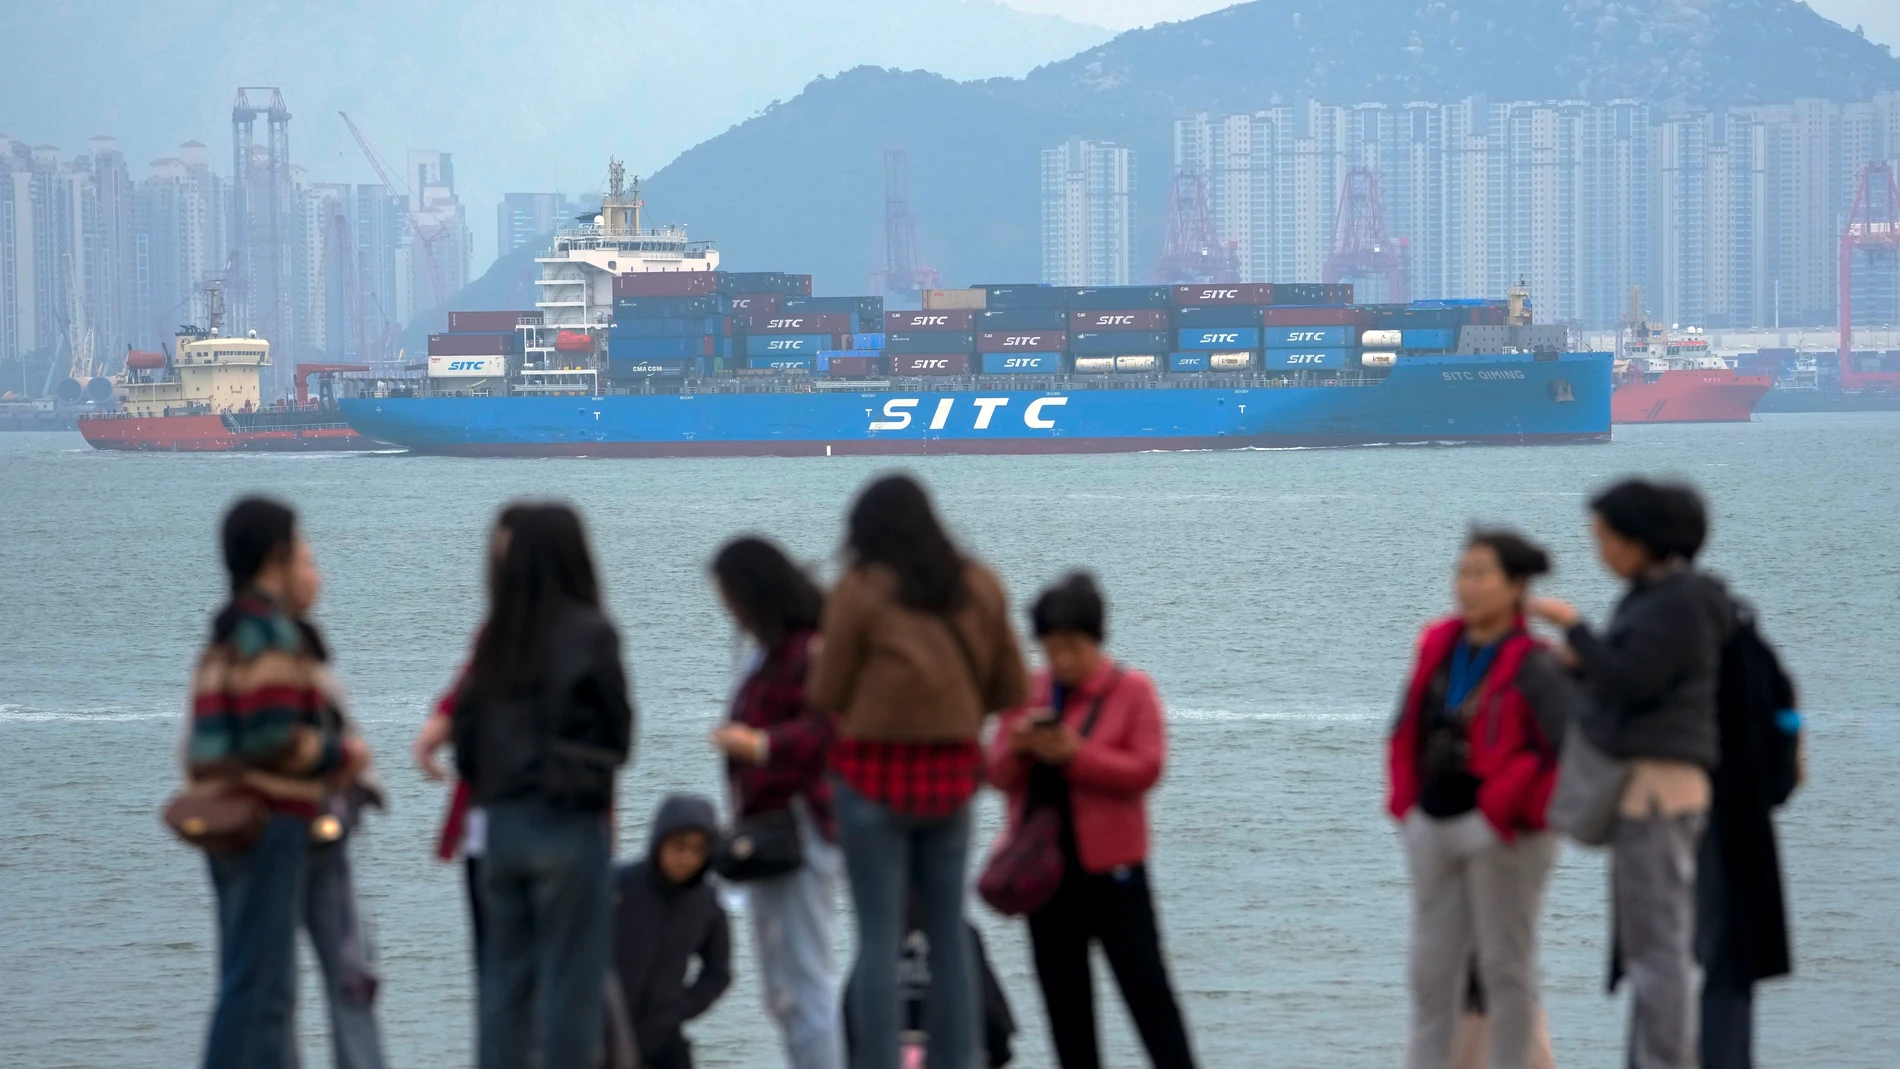 File - A container ship passes tourists in Xiamen in southeast China's Fujian province on Dec. 26, 2023. China’s exports and imports for the January-February period beat estimates, an indication that demand may be improving as Beijing attempts to boost economic recovery, according to customs data released Thursday, March 7, 2024. (AP Photo/Andy Wong, File)